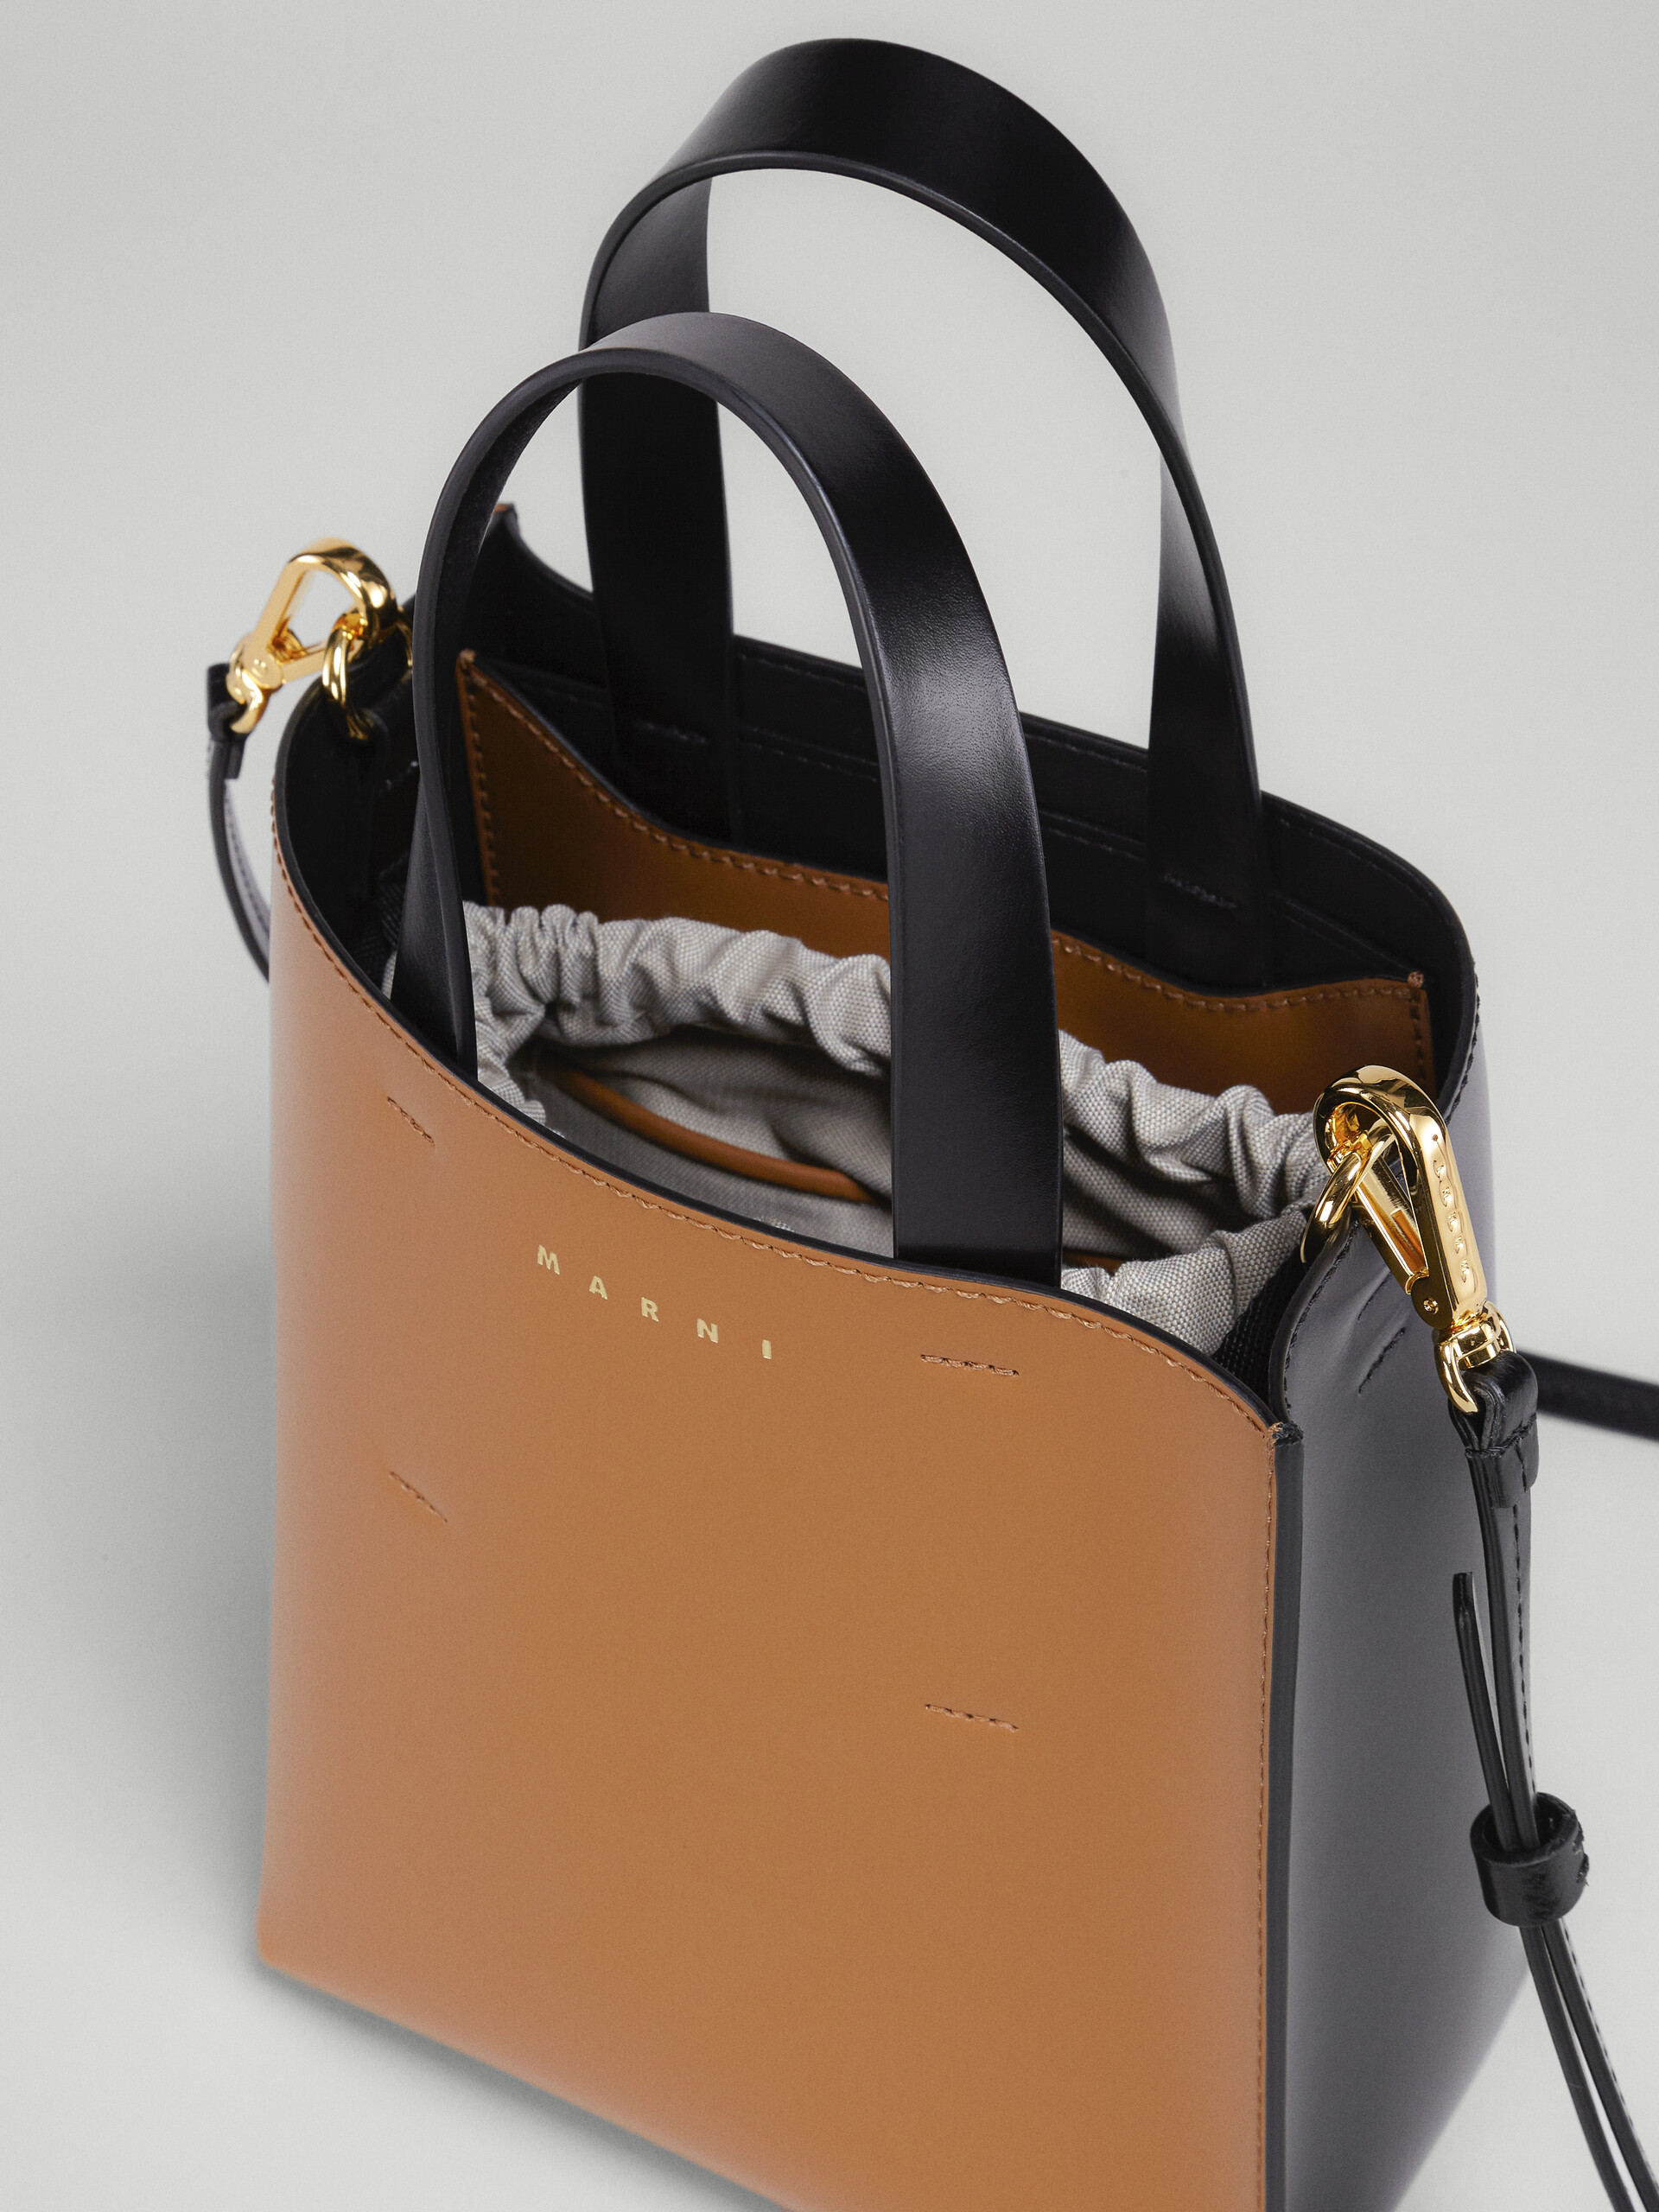 Museo Mini Bag in black and brown leather - Shopping Bags - Image 5